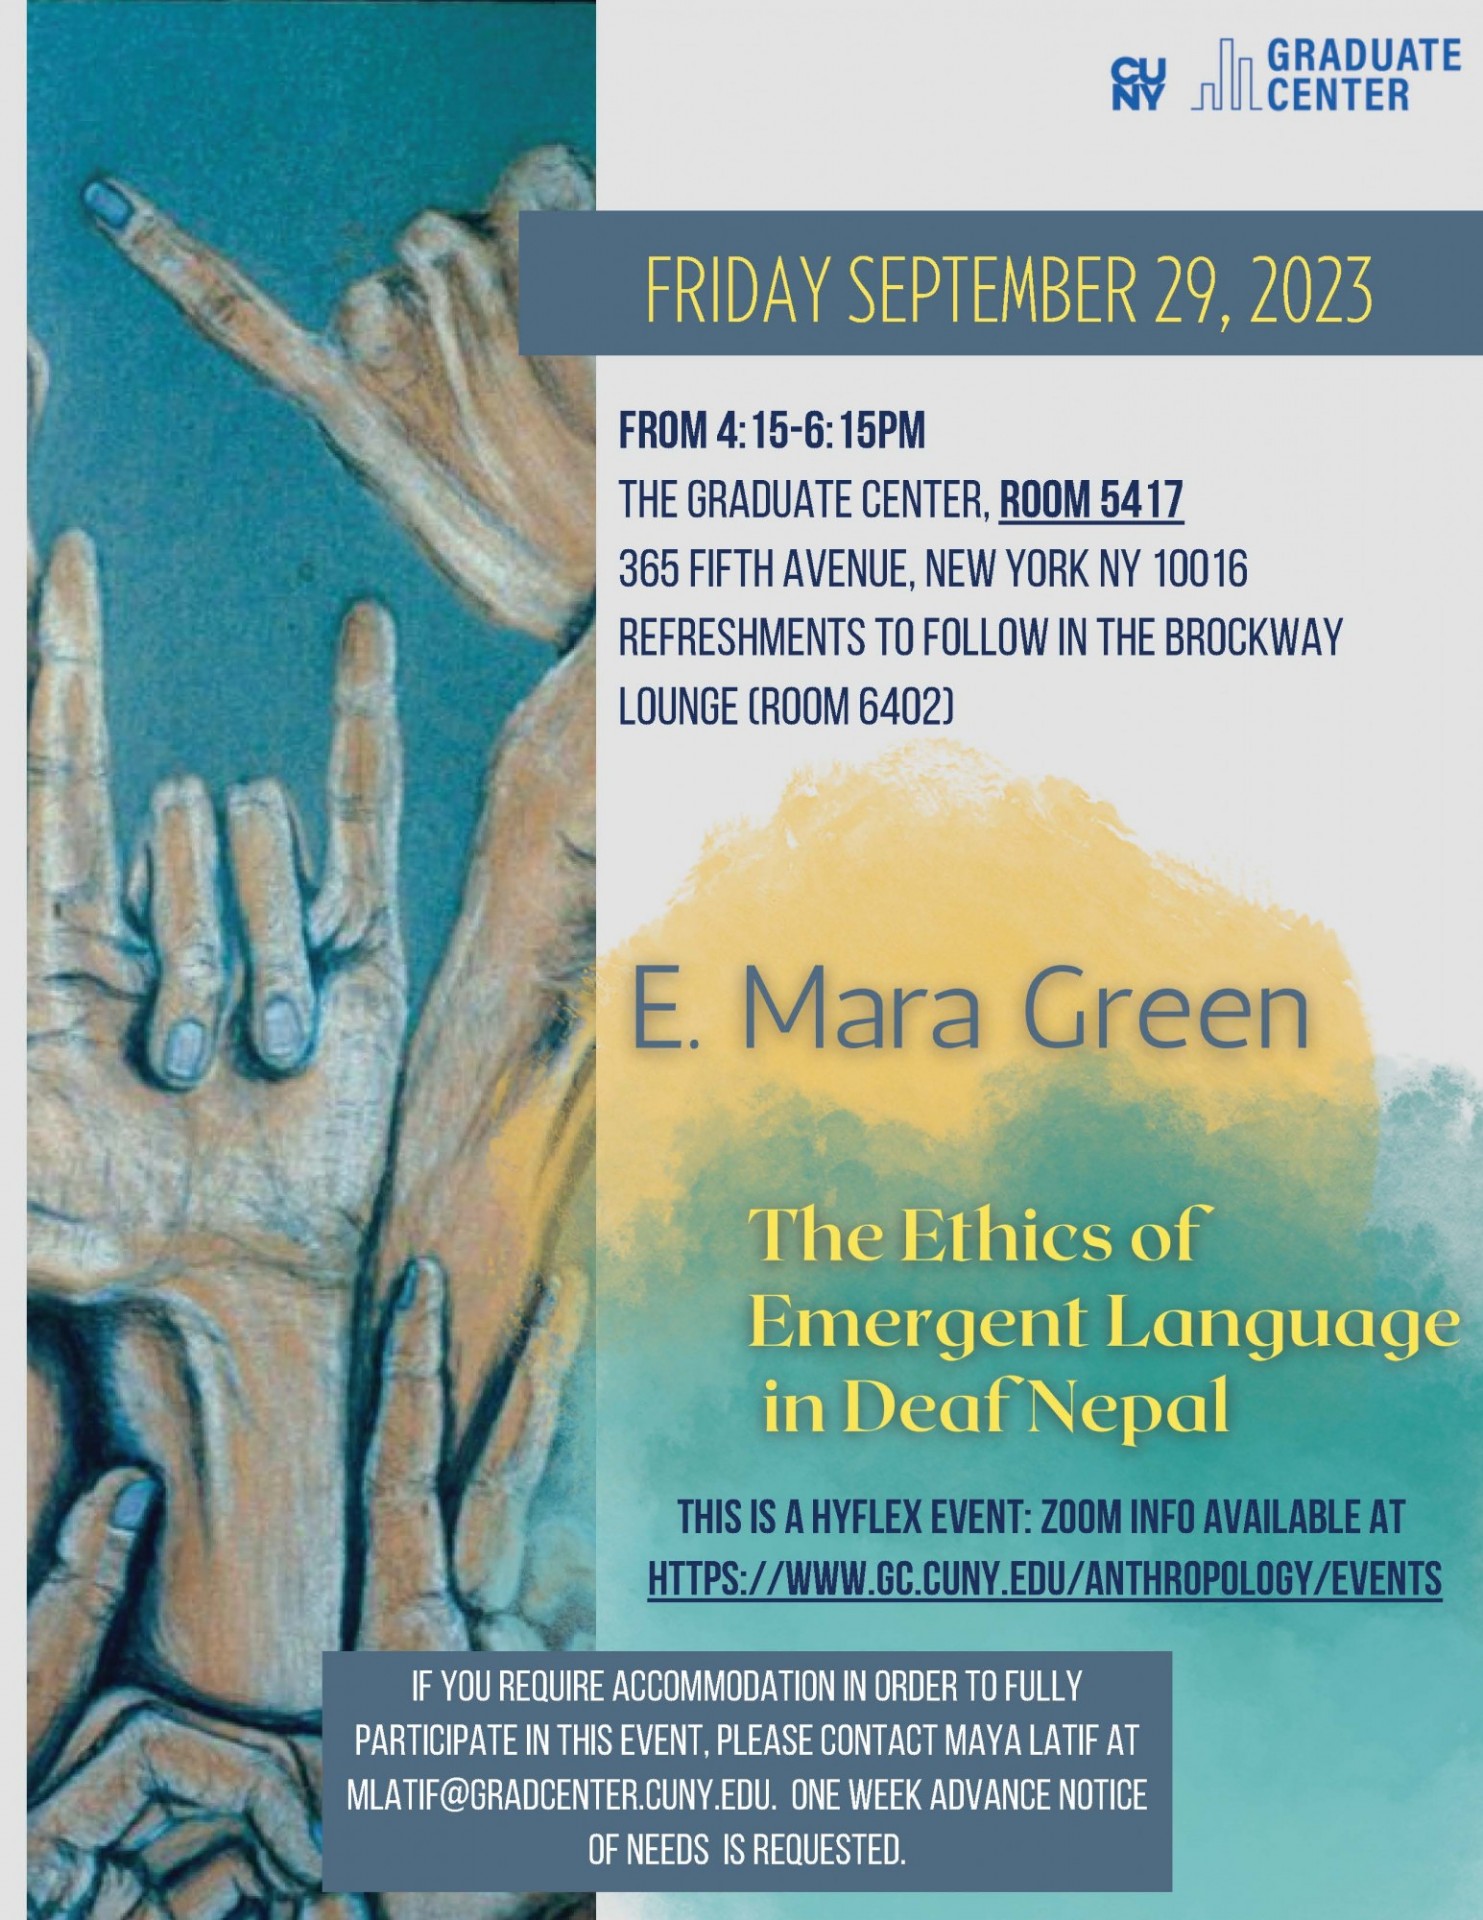 poster for E. Mara Green lecture, 'The Ethics of Emergent Language in Deaf Nepal,' Friday, September 29, 4:15pm (CUNY GRADUATE CENTER)